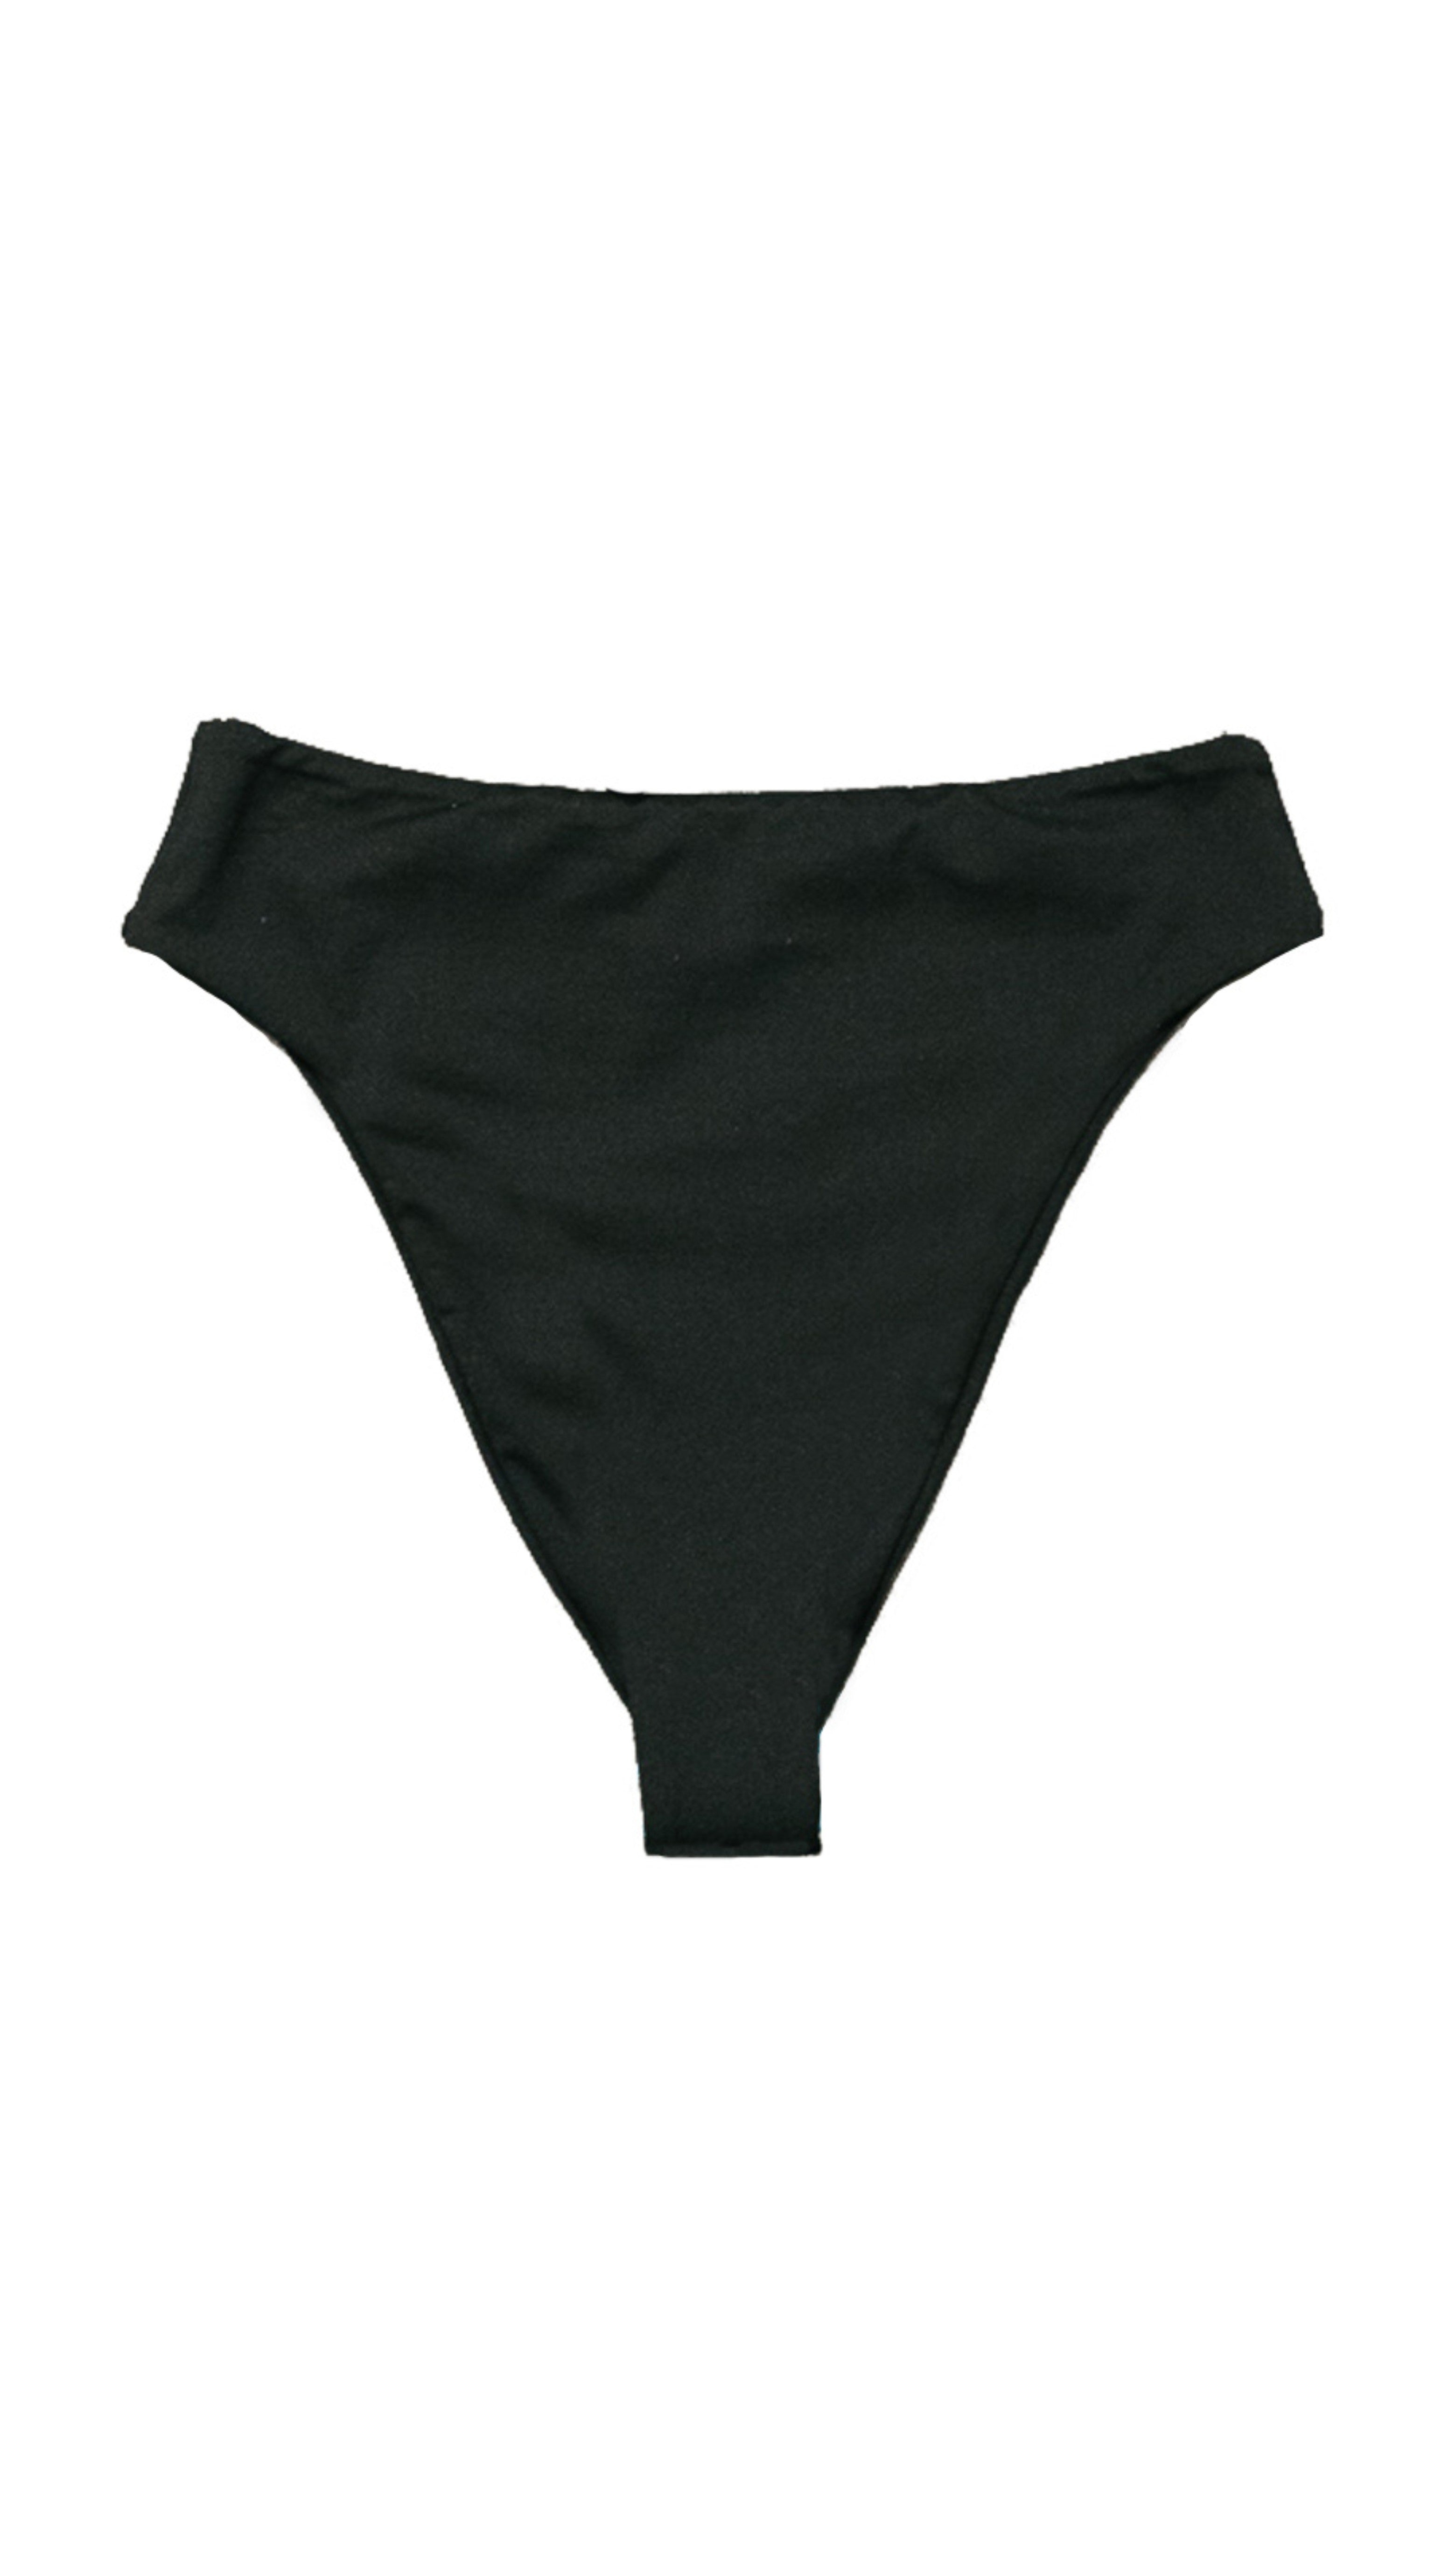 Leslie Amon High Waist Bikini Bottom in Black. Medium coverage and four way stretch material. Product photo from the back.